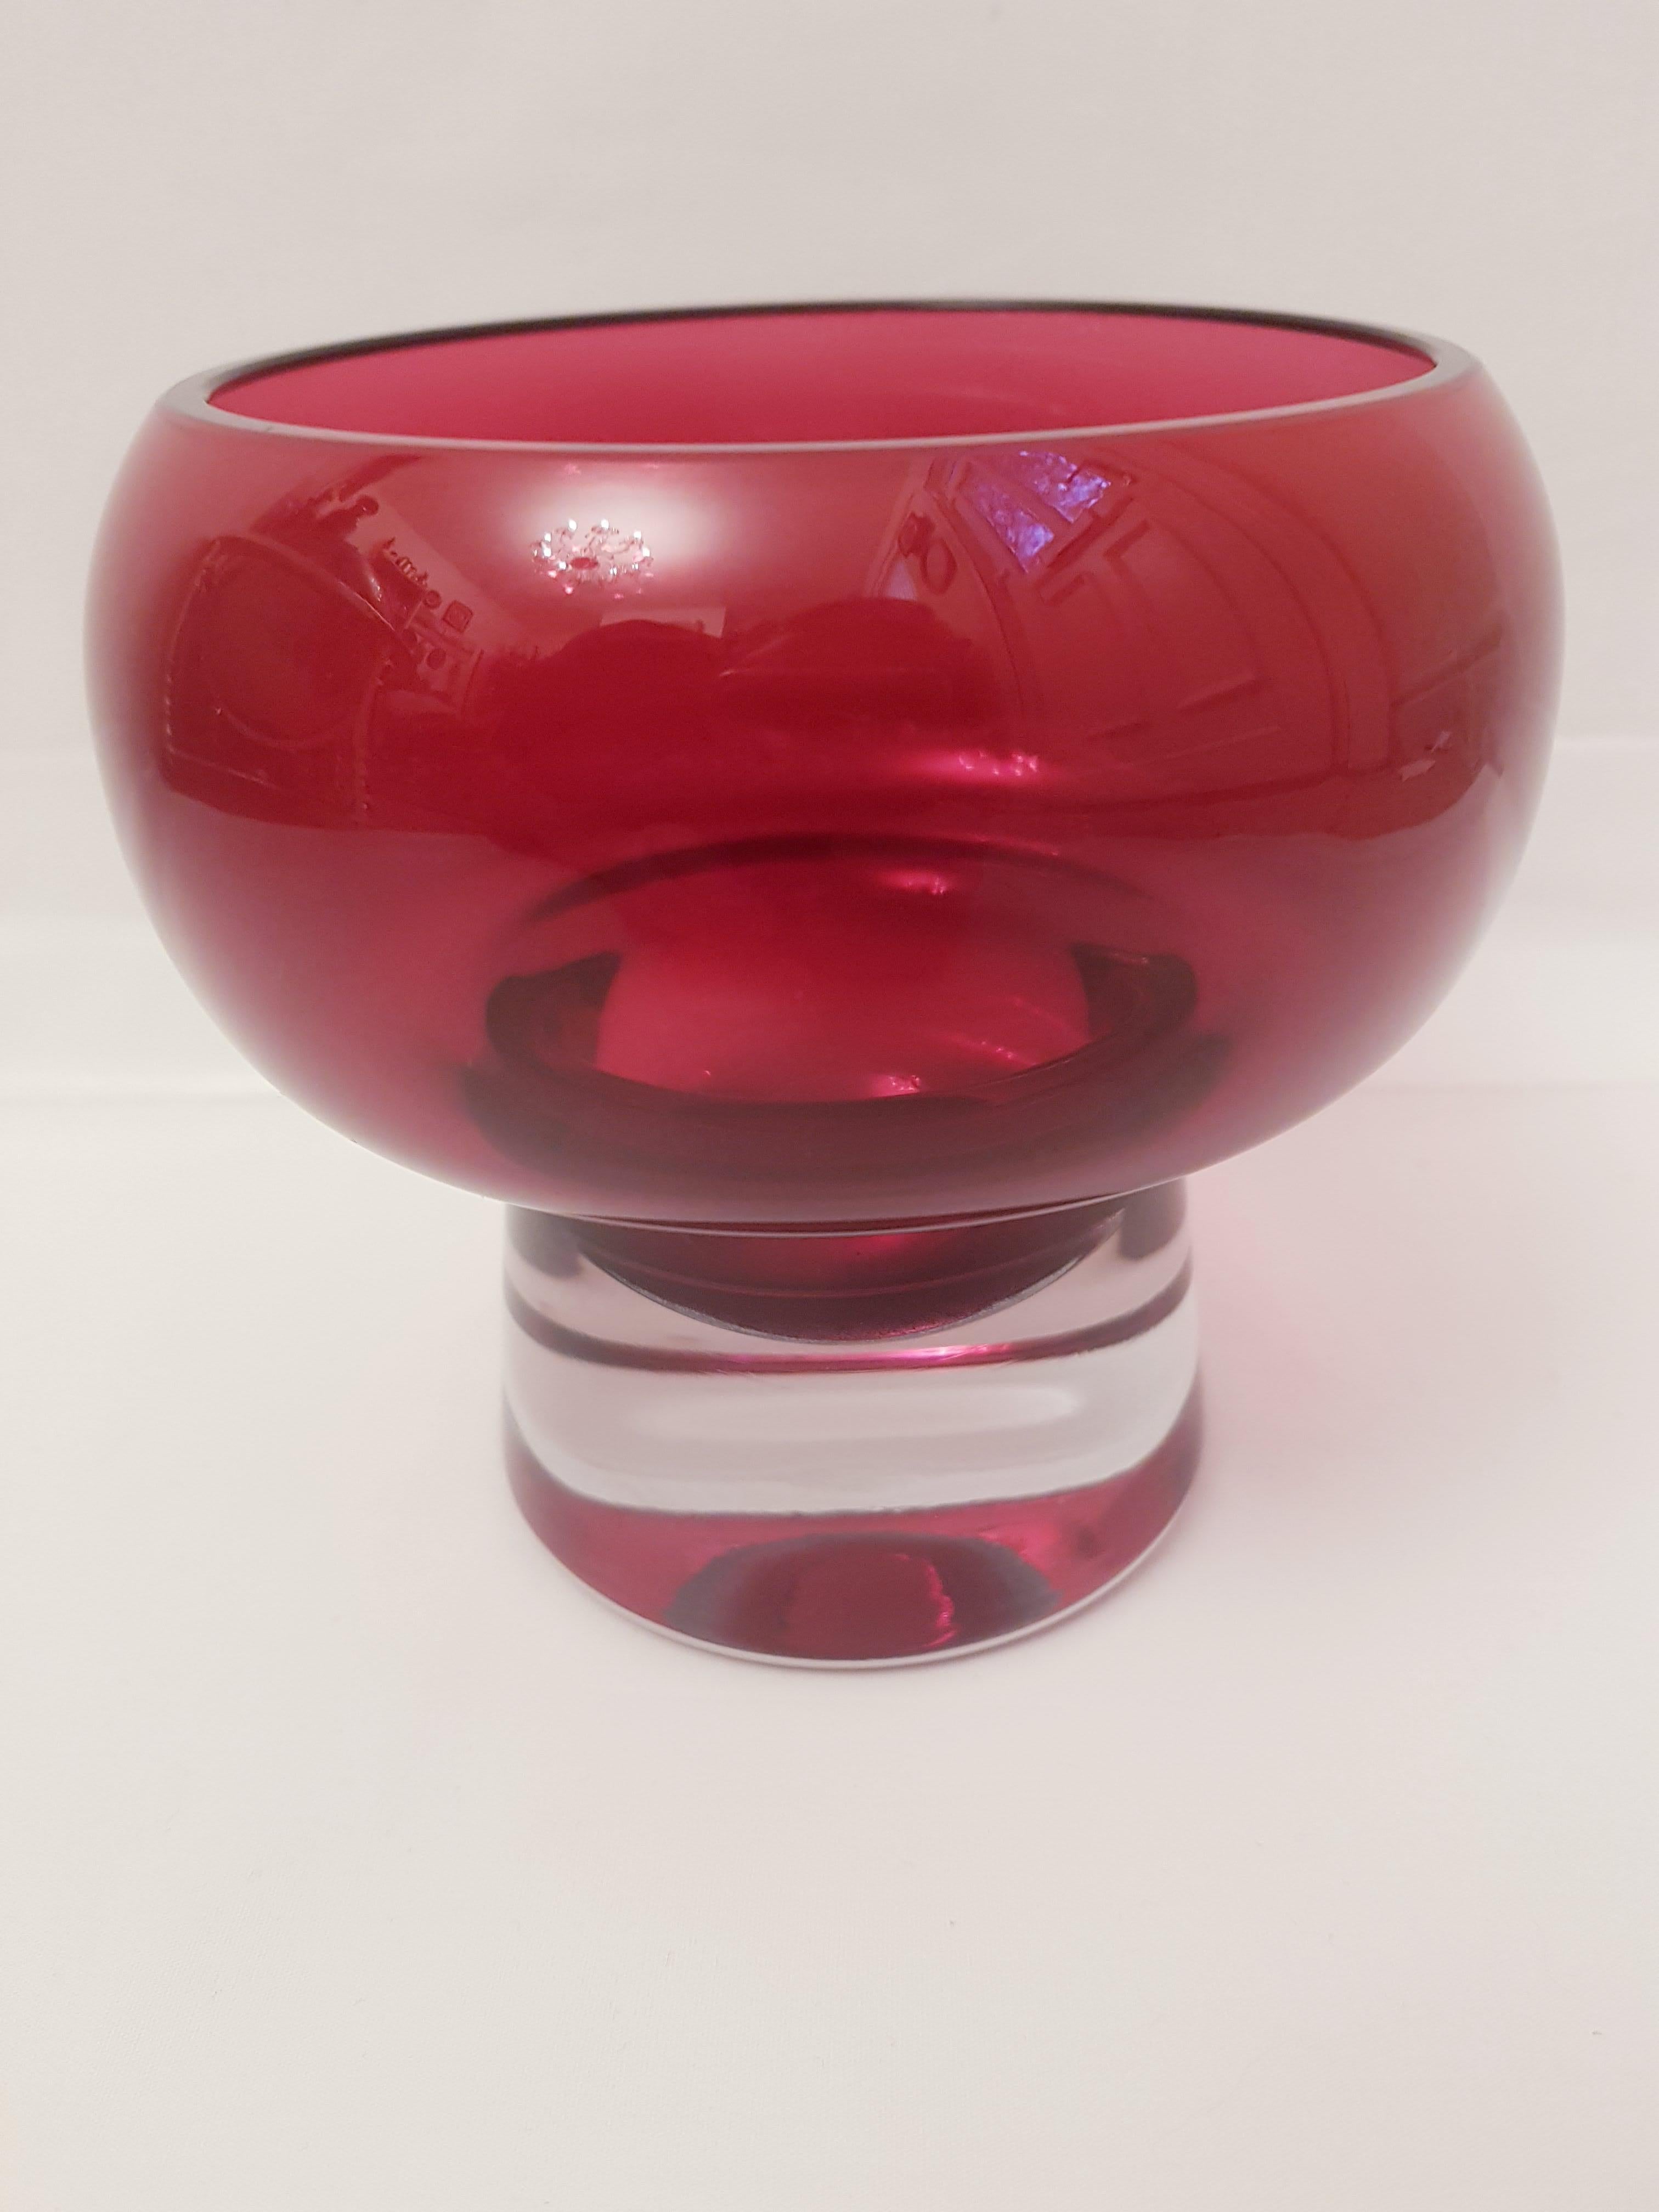 New murano glass somerso bowl designed by Karim Rashid Coppa. A cheerful and decisive contrast made even more fascinating by the transparency and the perfect of murano glass.